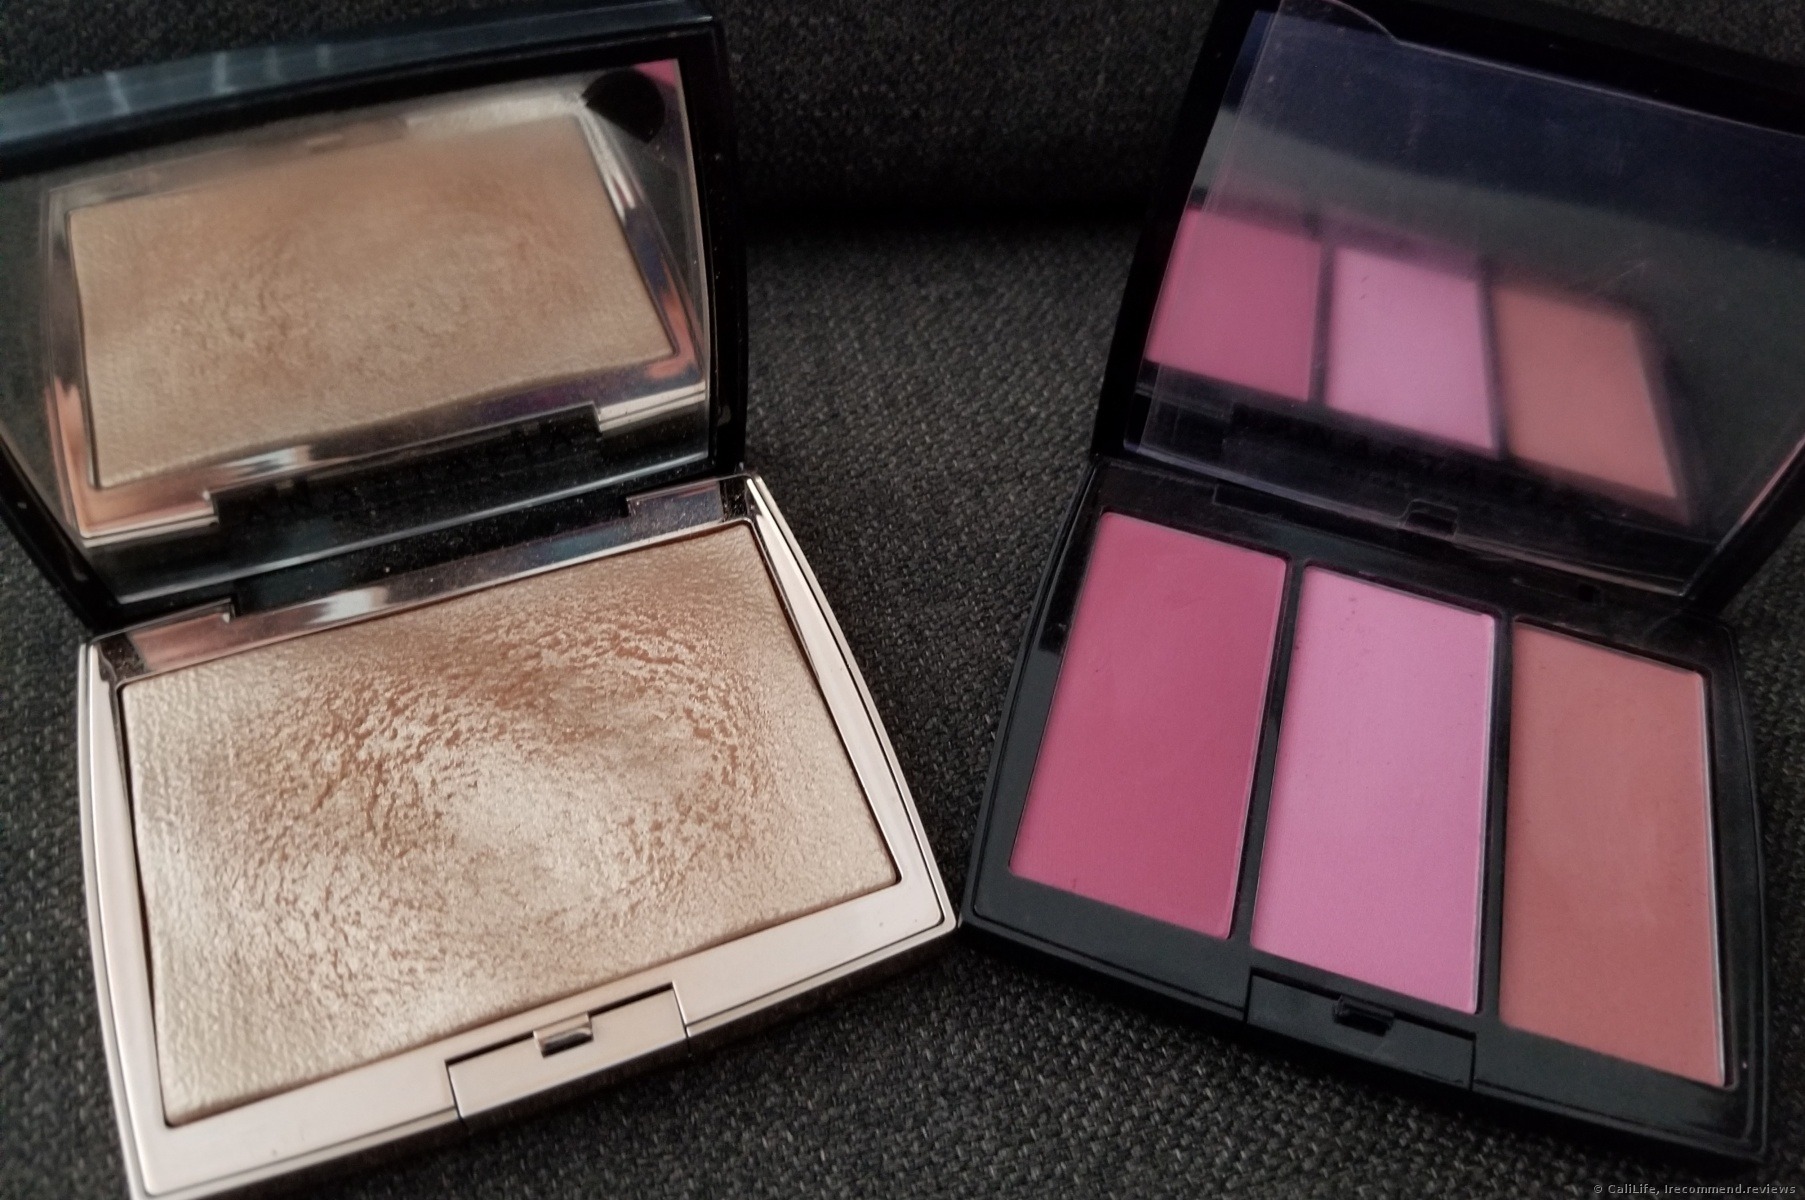 Exquisites Design Anastasia Beverly Hills - the Consumer Anastasia from The your attention. palette which worth Blush Passion. reviews shade is » | new Pink «The in Trio product